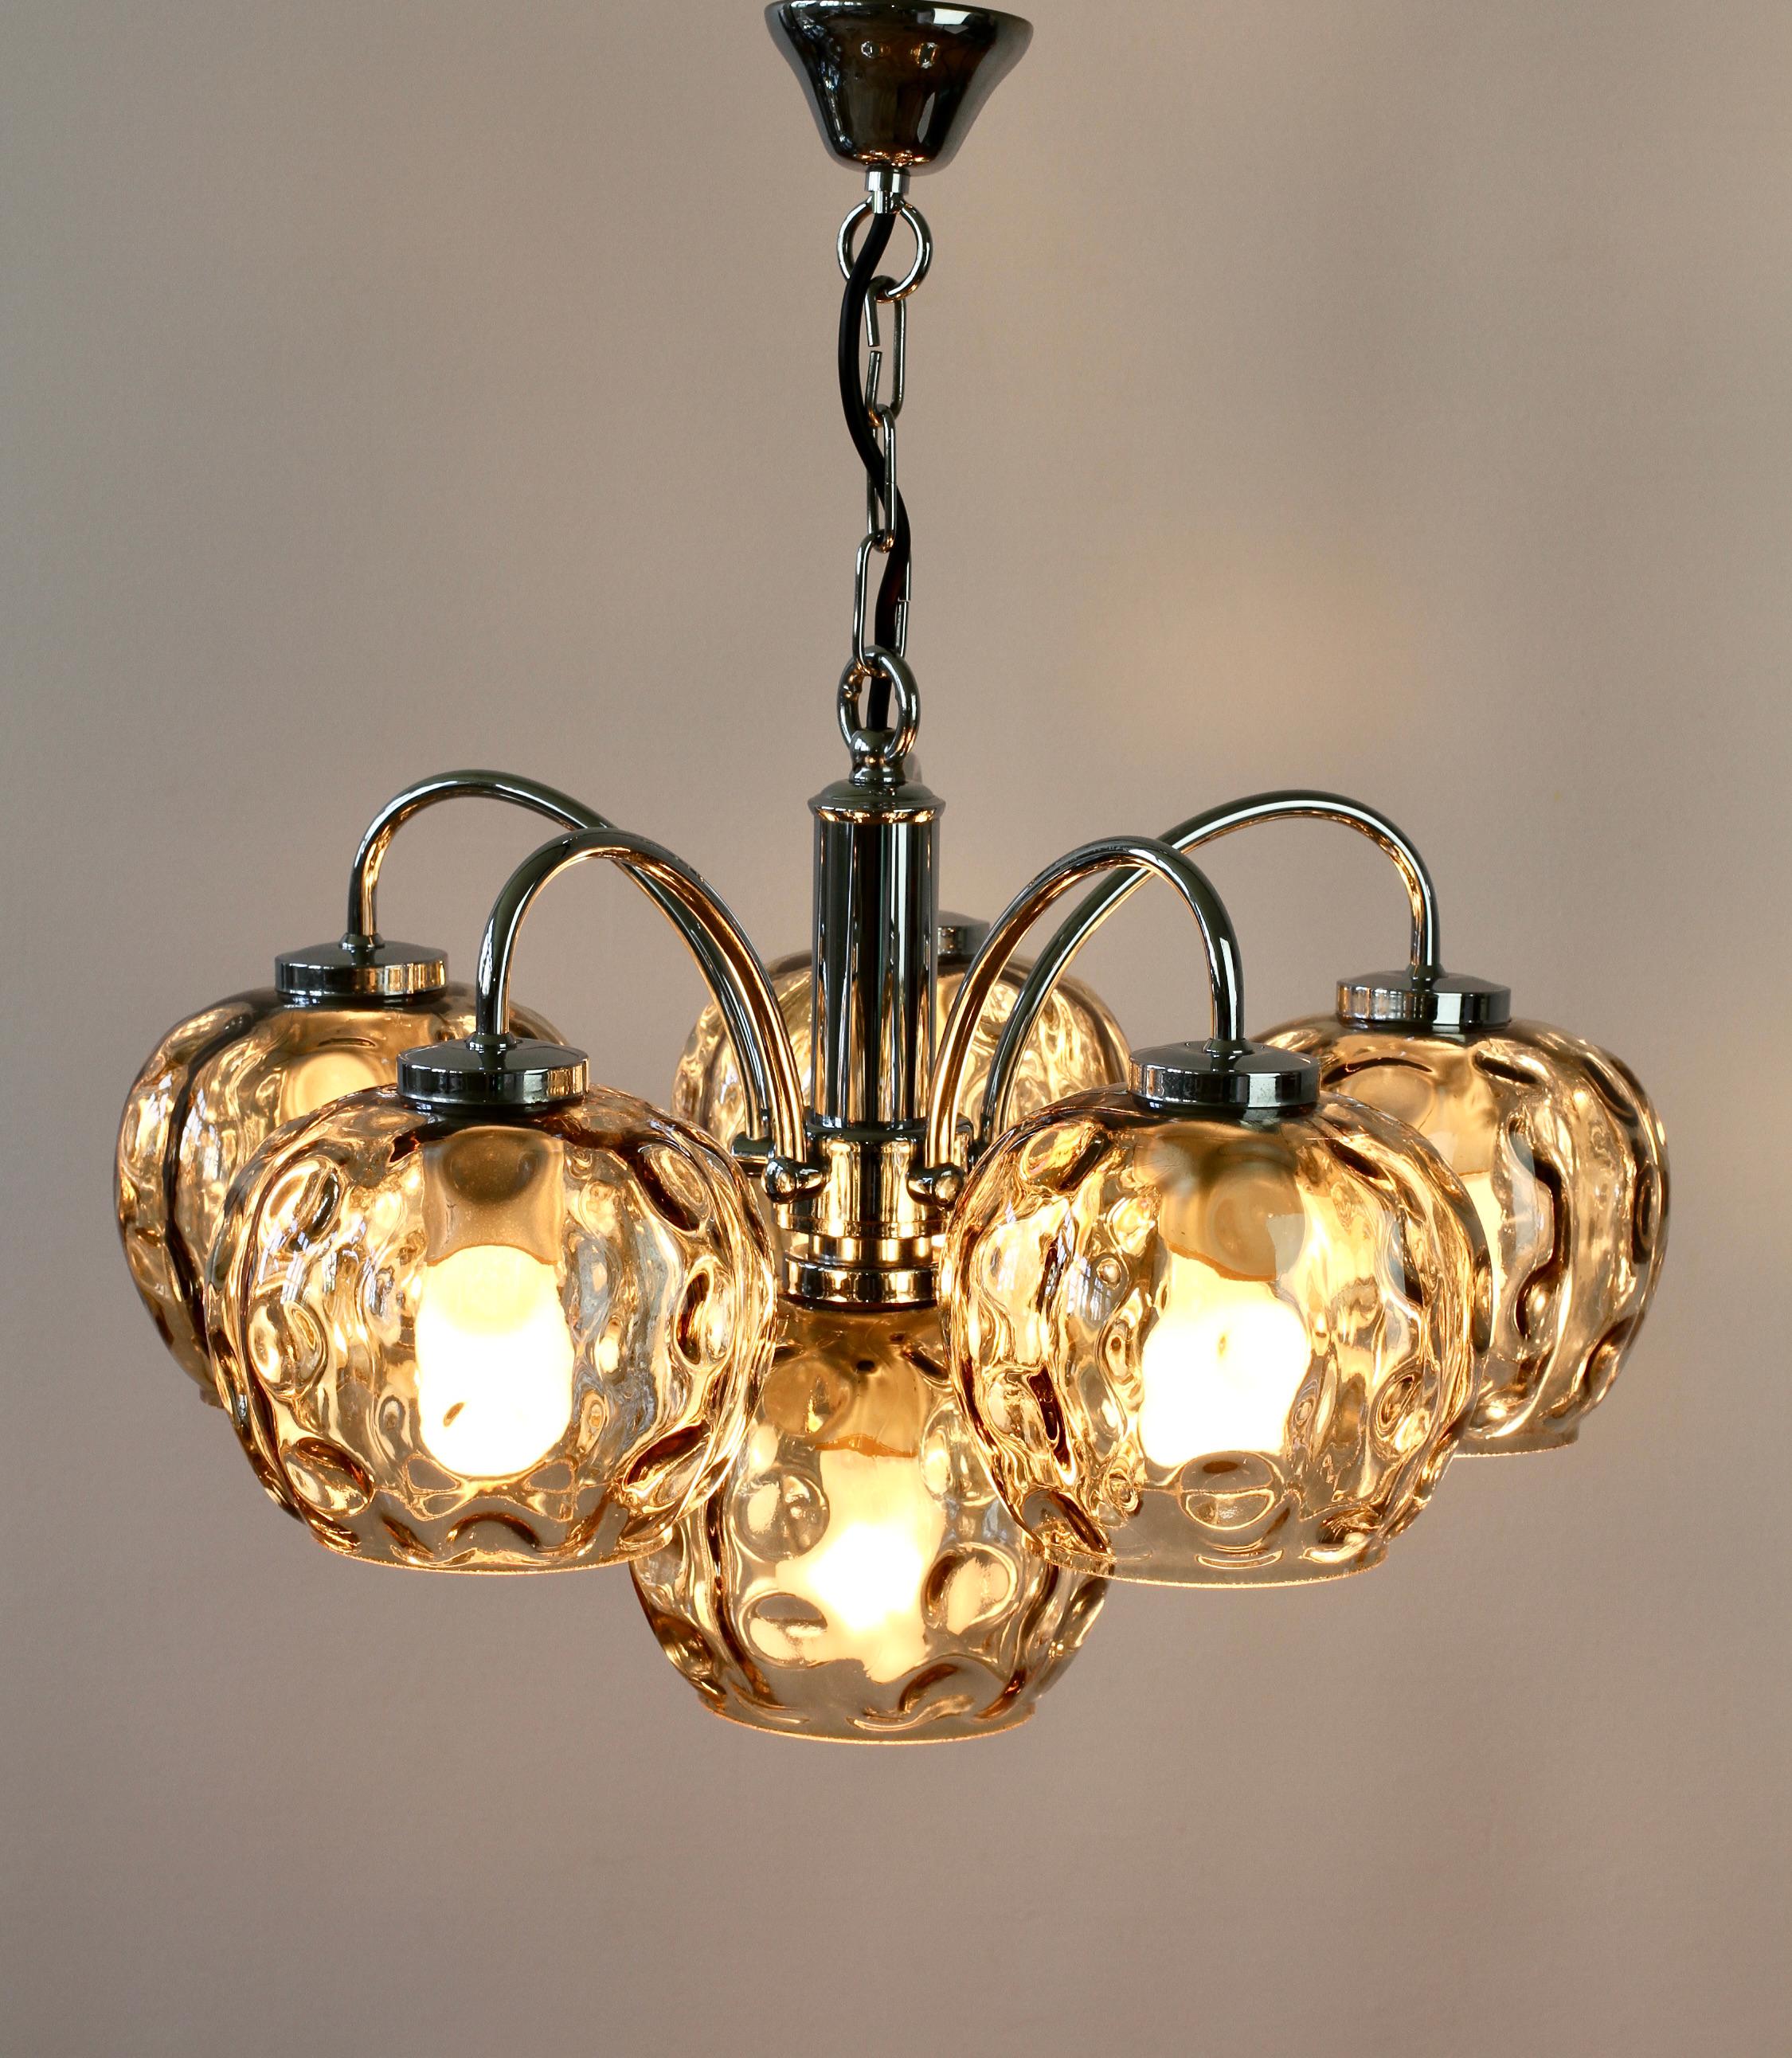 German 1970s Vintage Six Arm Chrome Chandelier with Smoked Toned 